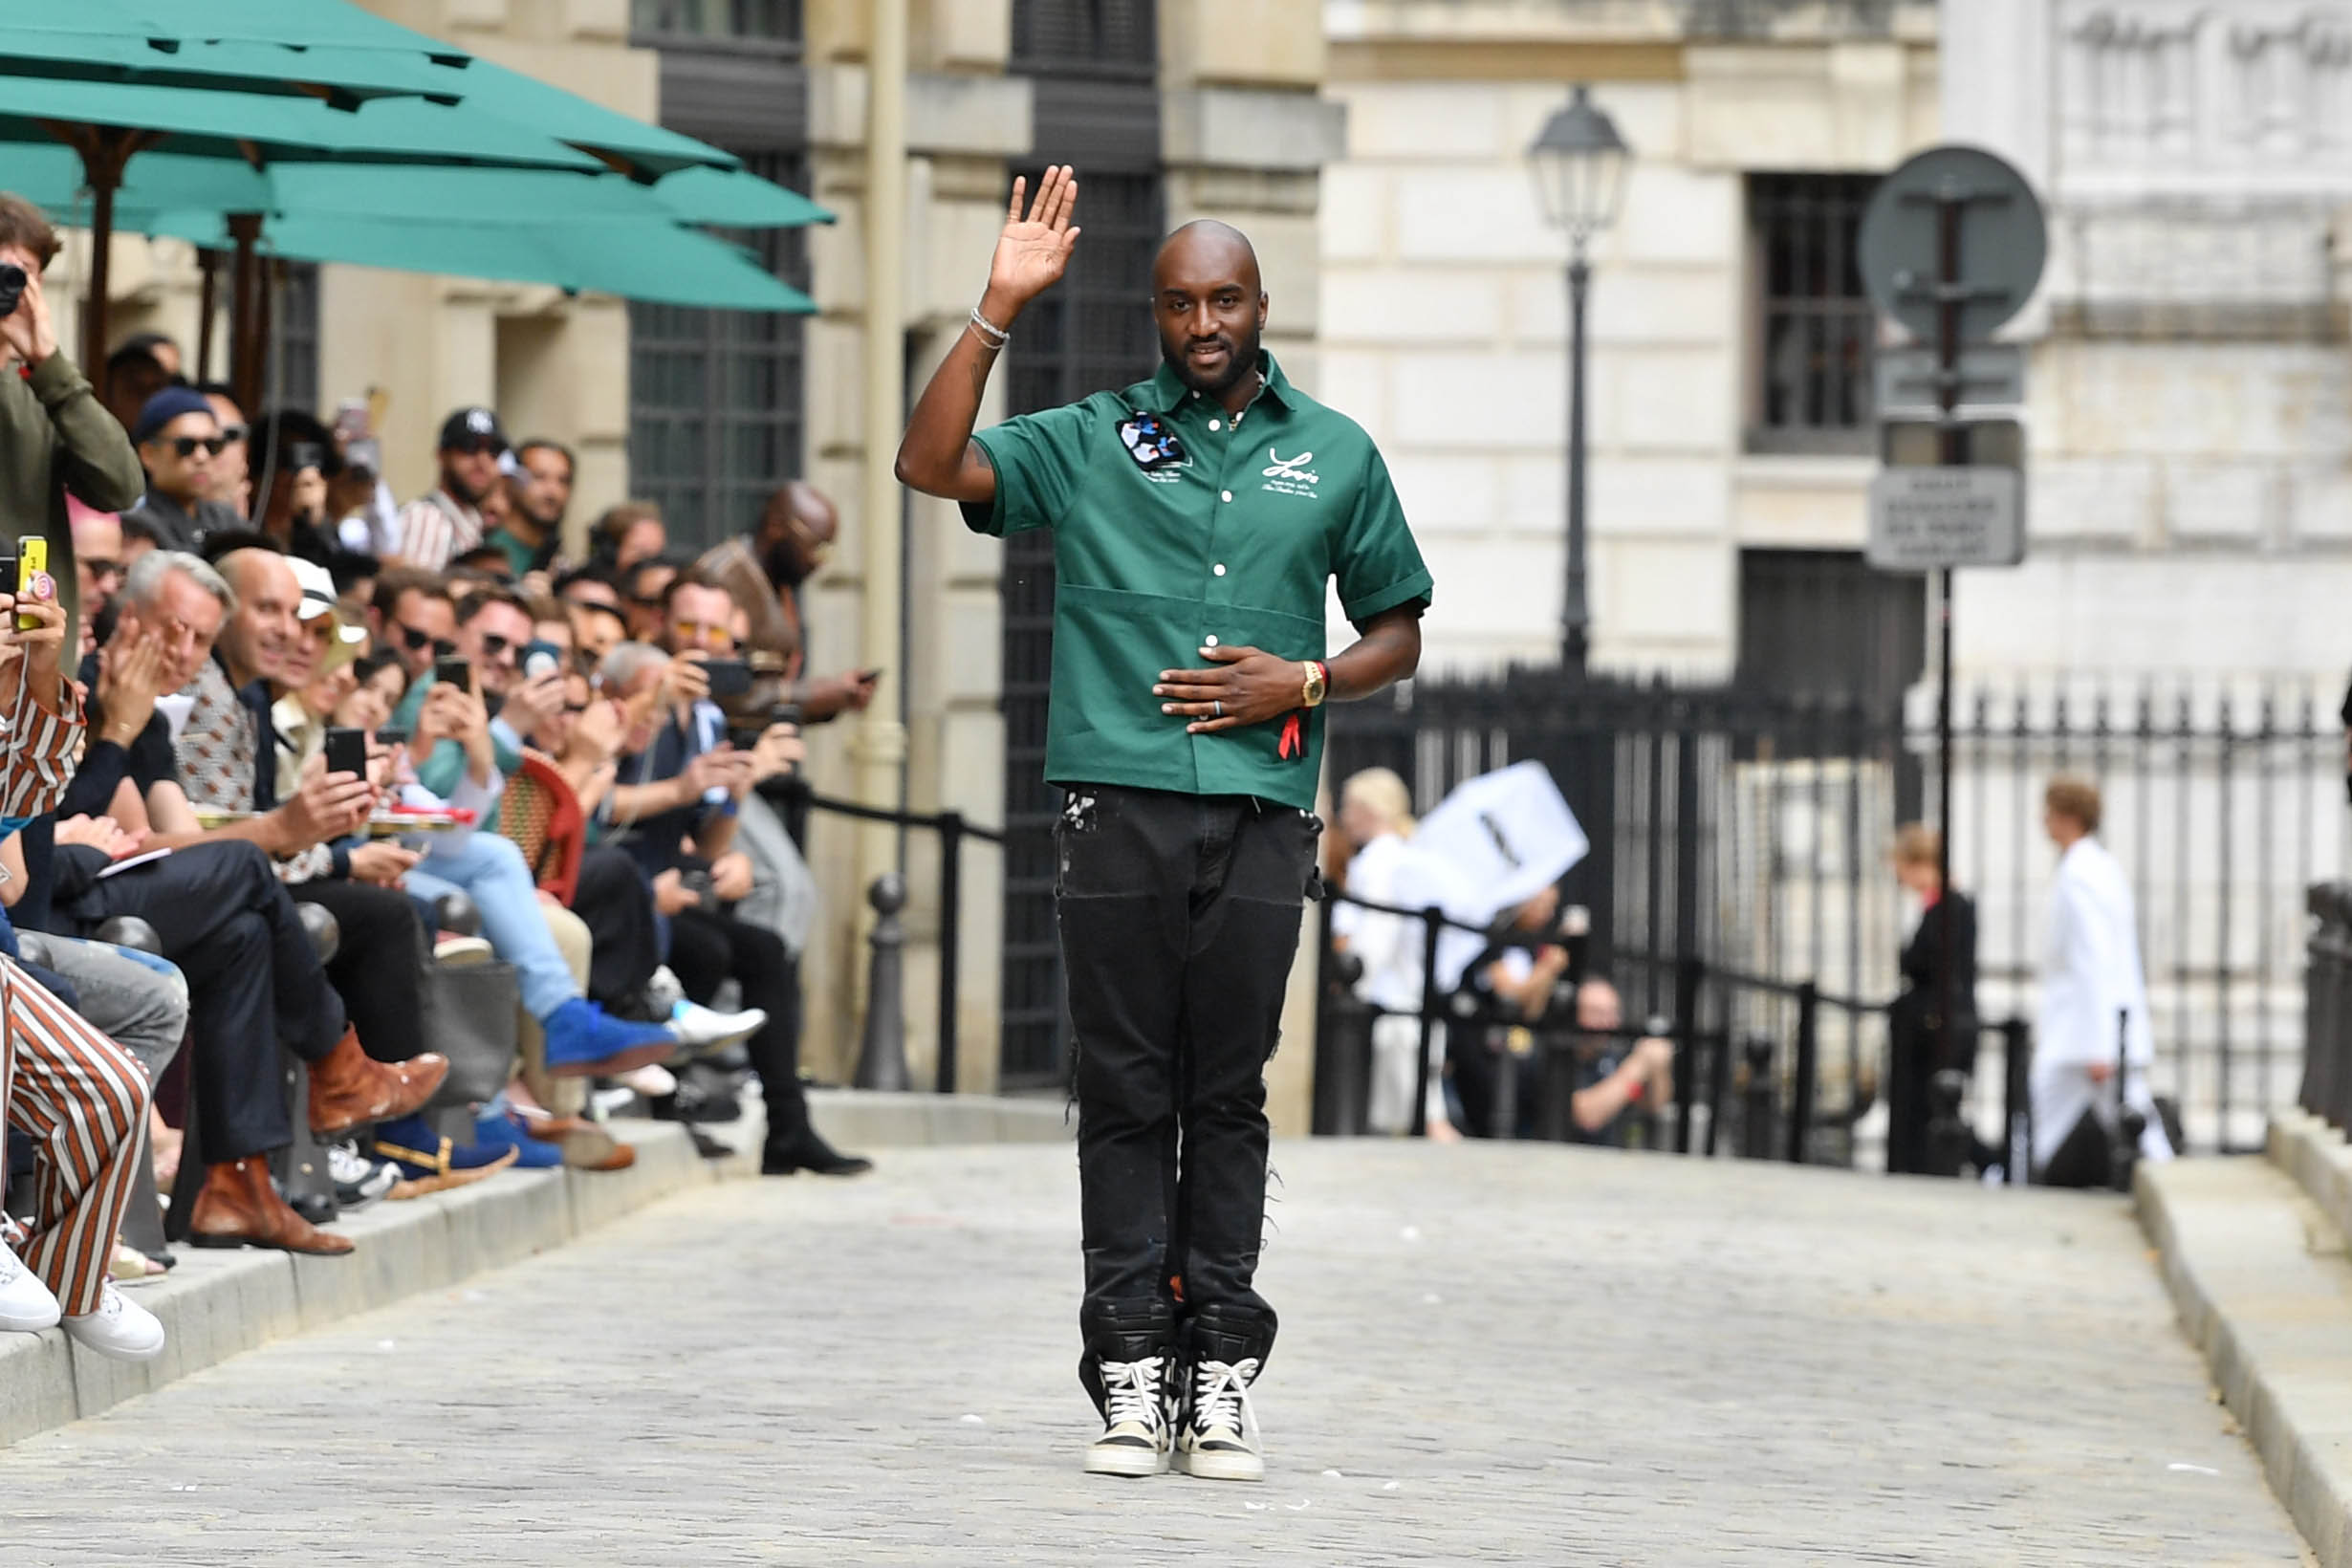 Designer Abloh opened the door for Africa fashion - The Mail & Guardian